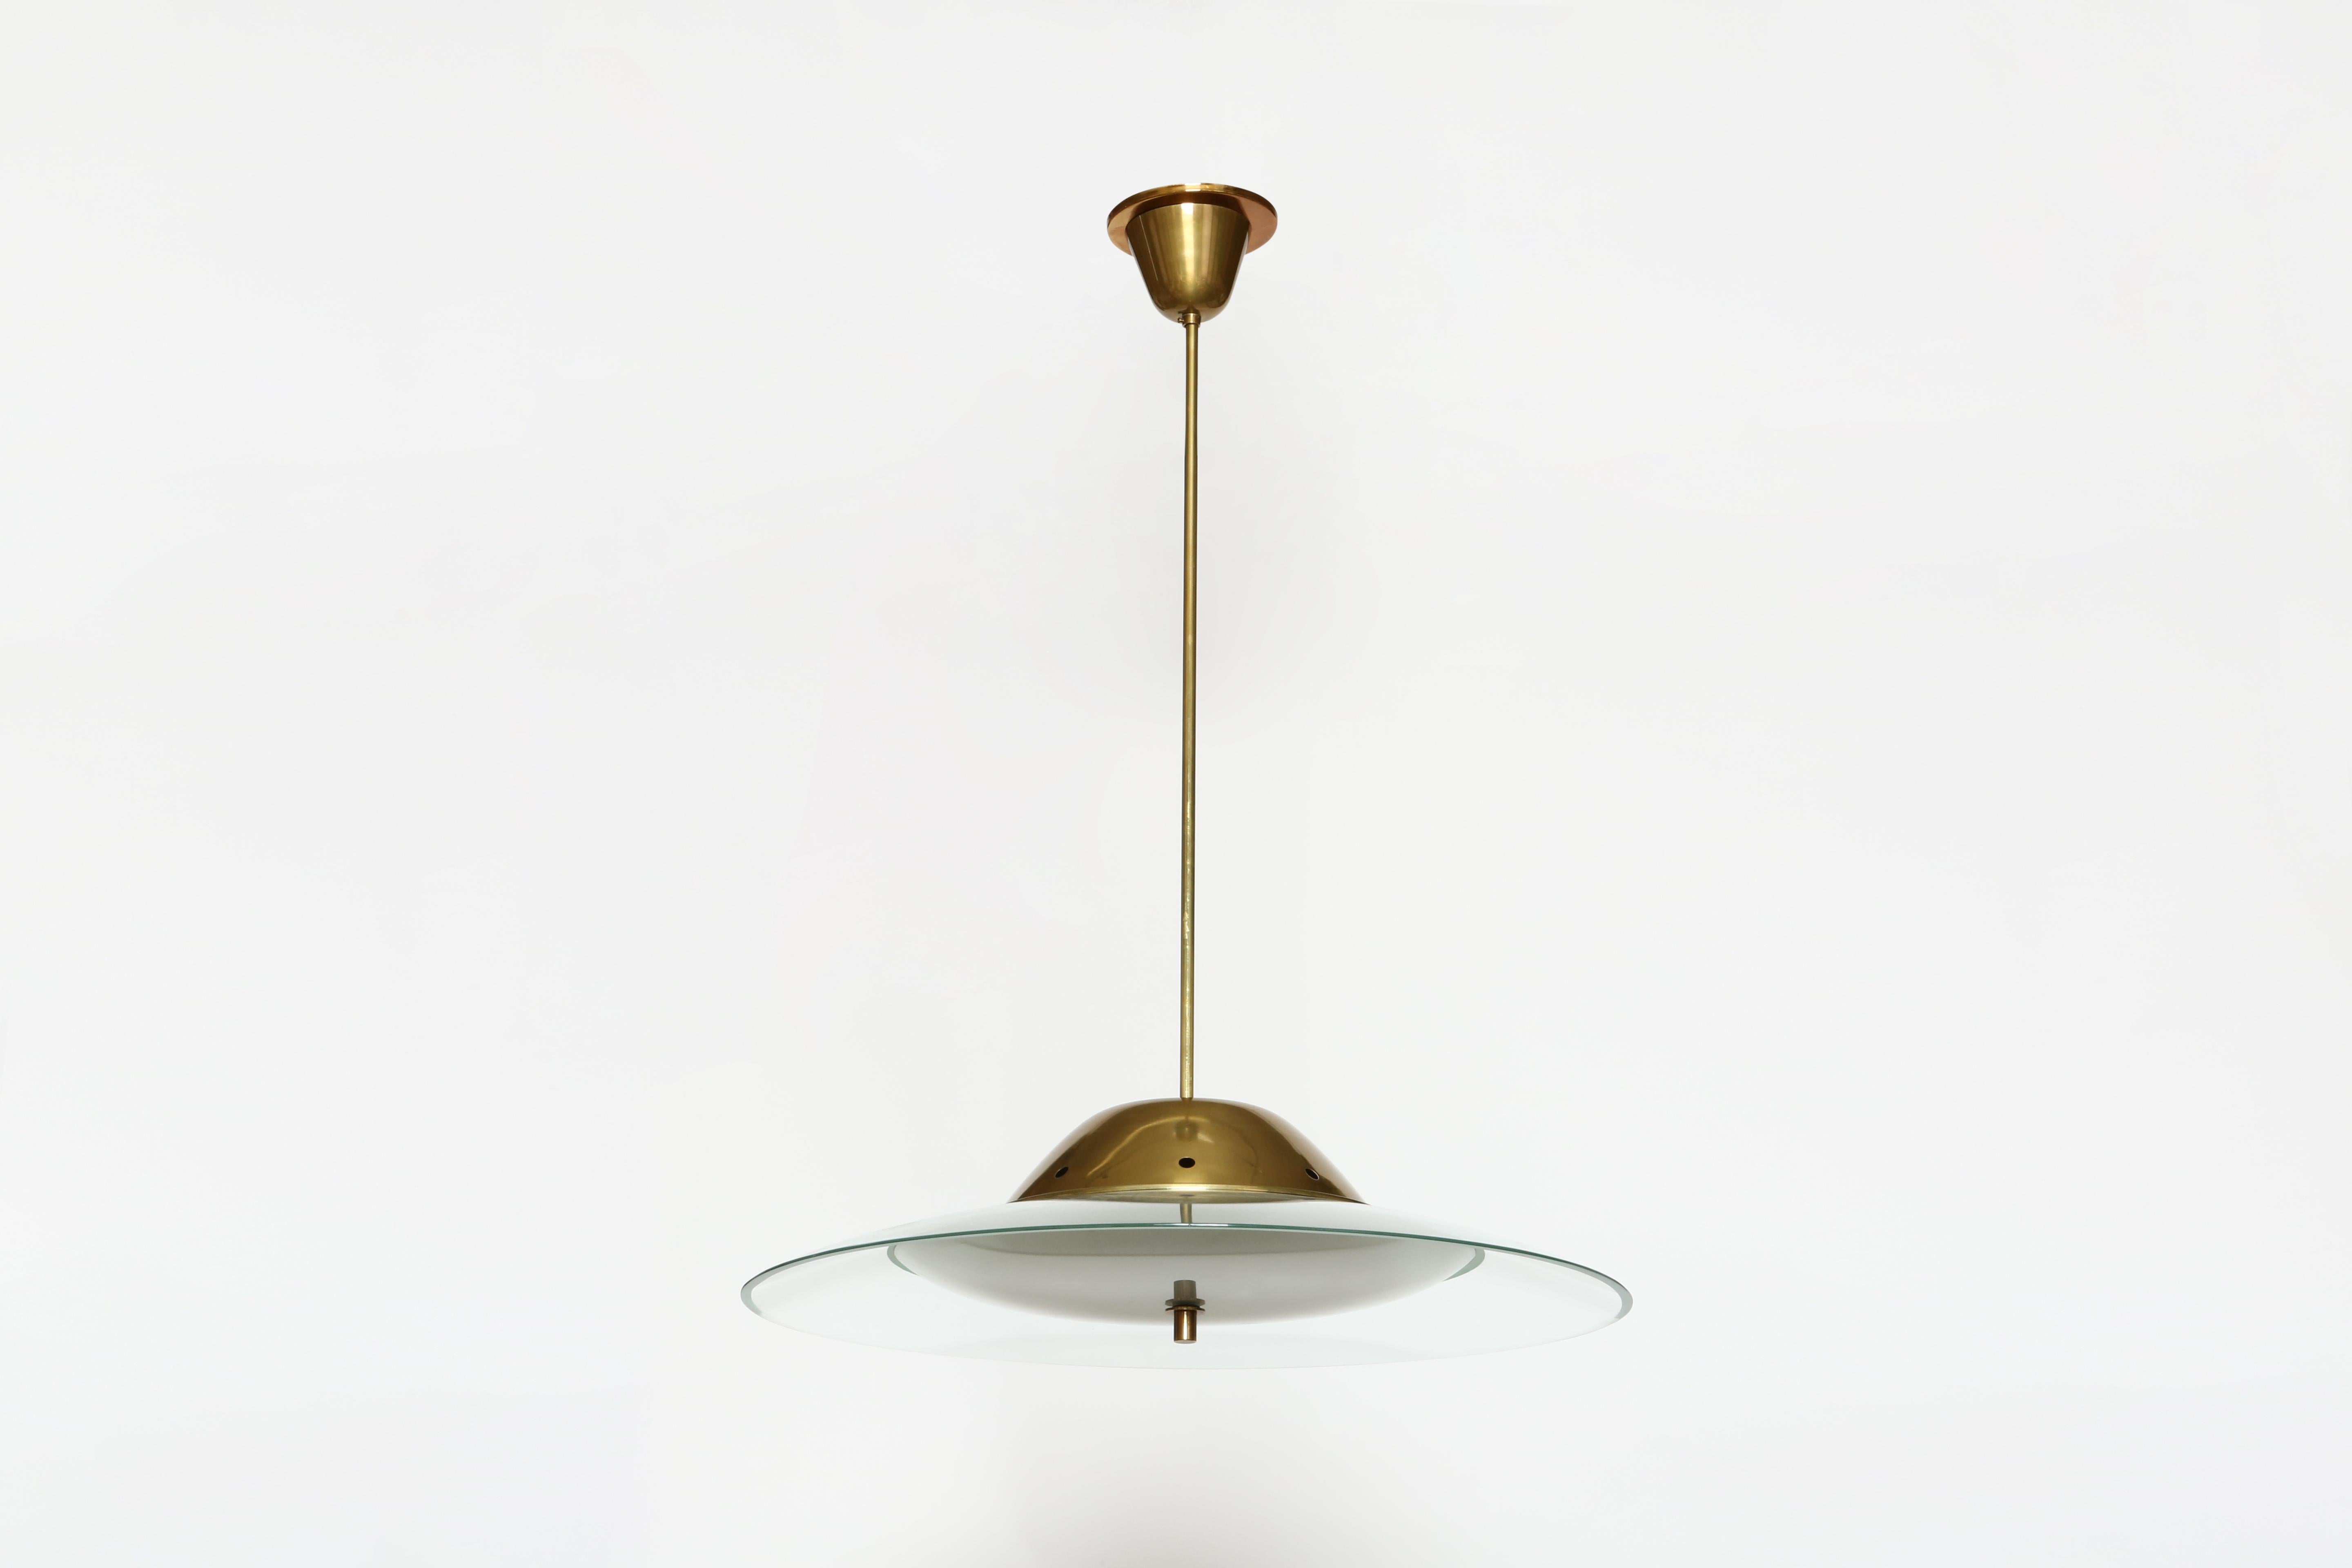 Max Ingrand for Fontana Arte ceiling suspension model 1239
Designed and made in Italy, 1960s
Takes 3 medium base bulbs.
Rewired for US.
Brass was beautifully restored.
Overall drop is adjustable. Stem can be made shorter.
Body of the fixture is 6